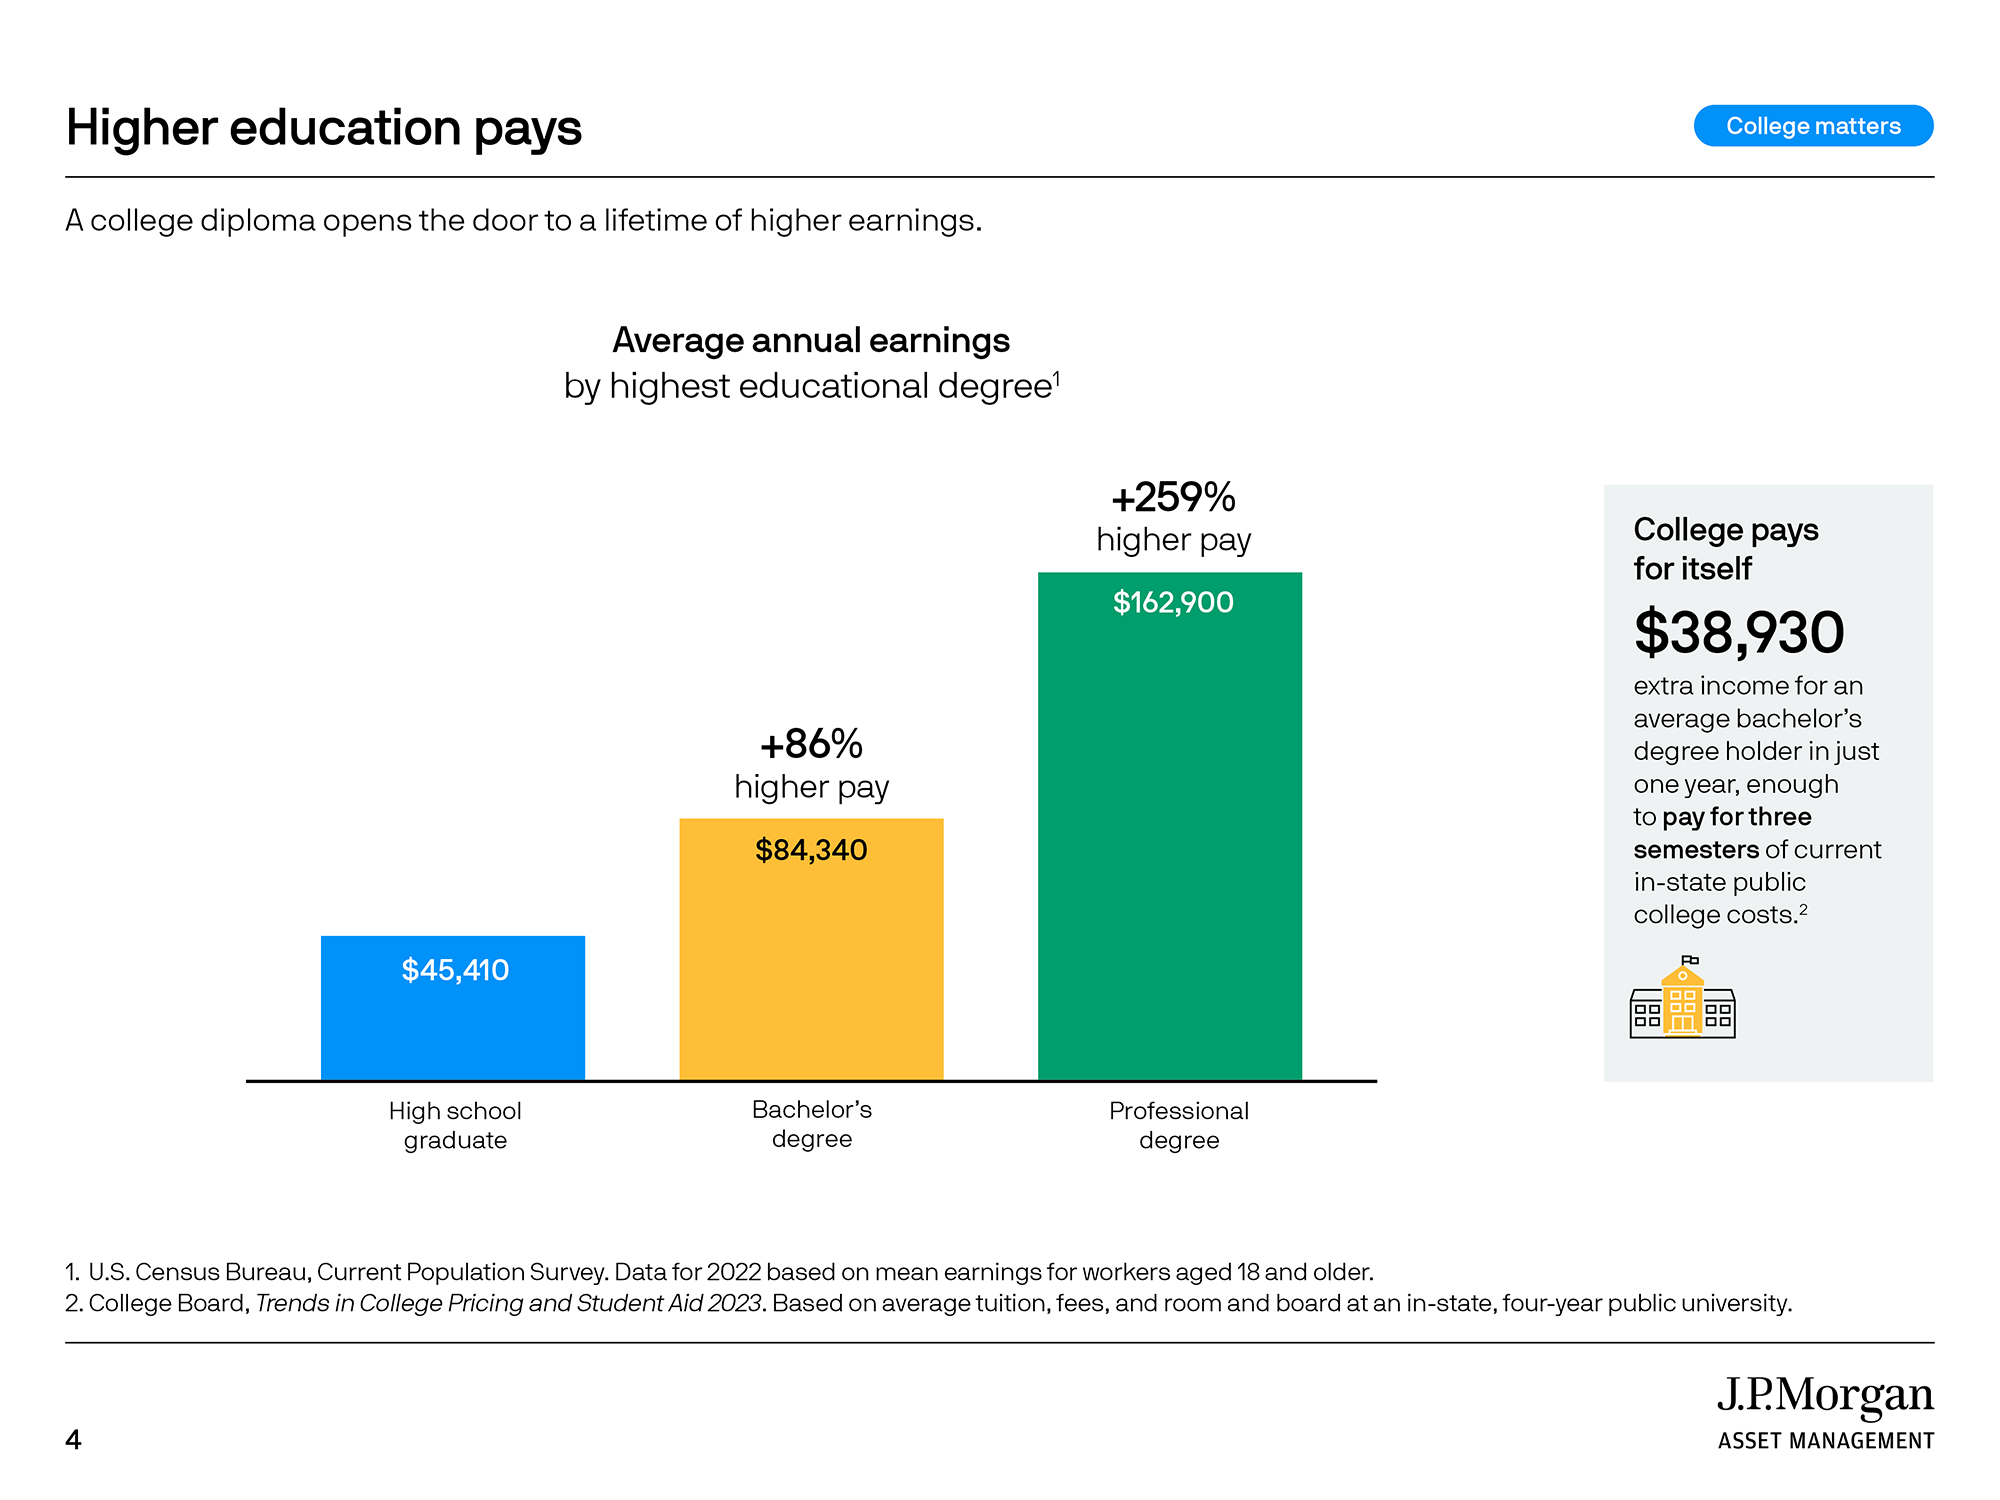 Higher education pays